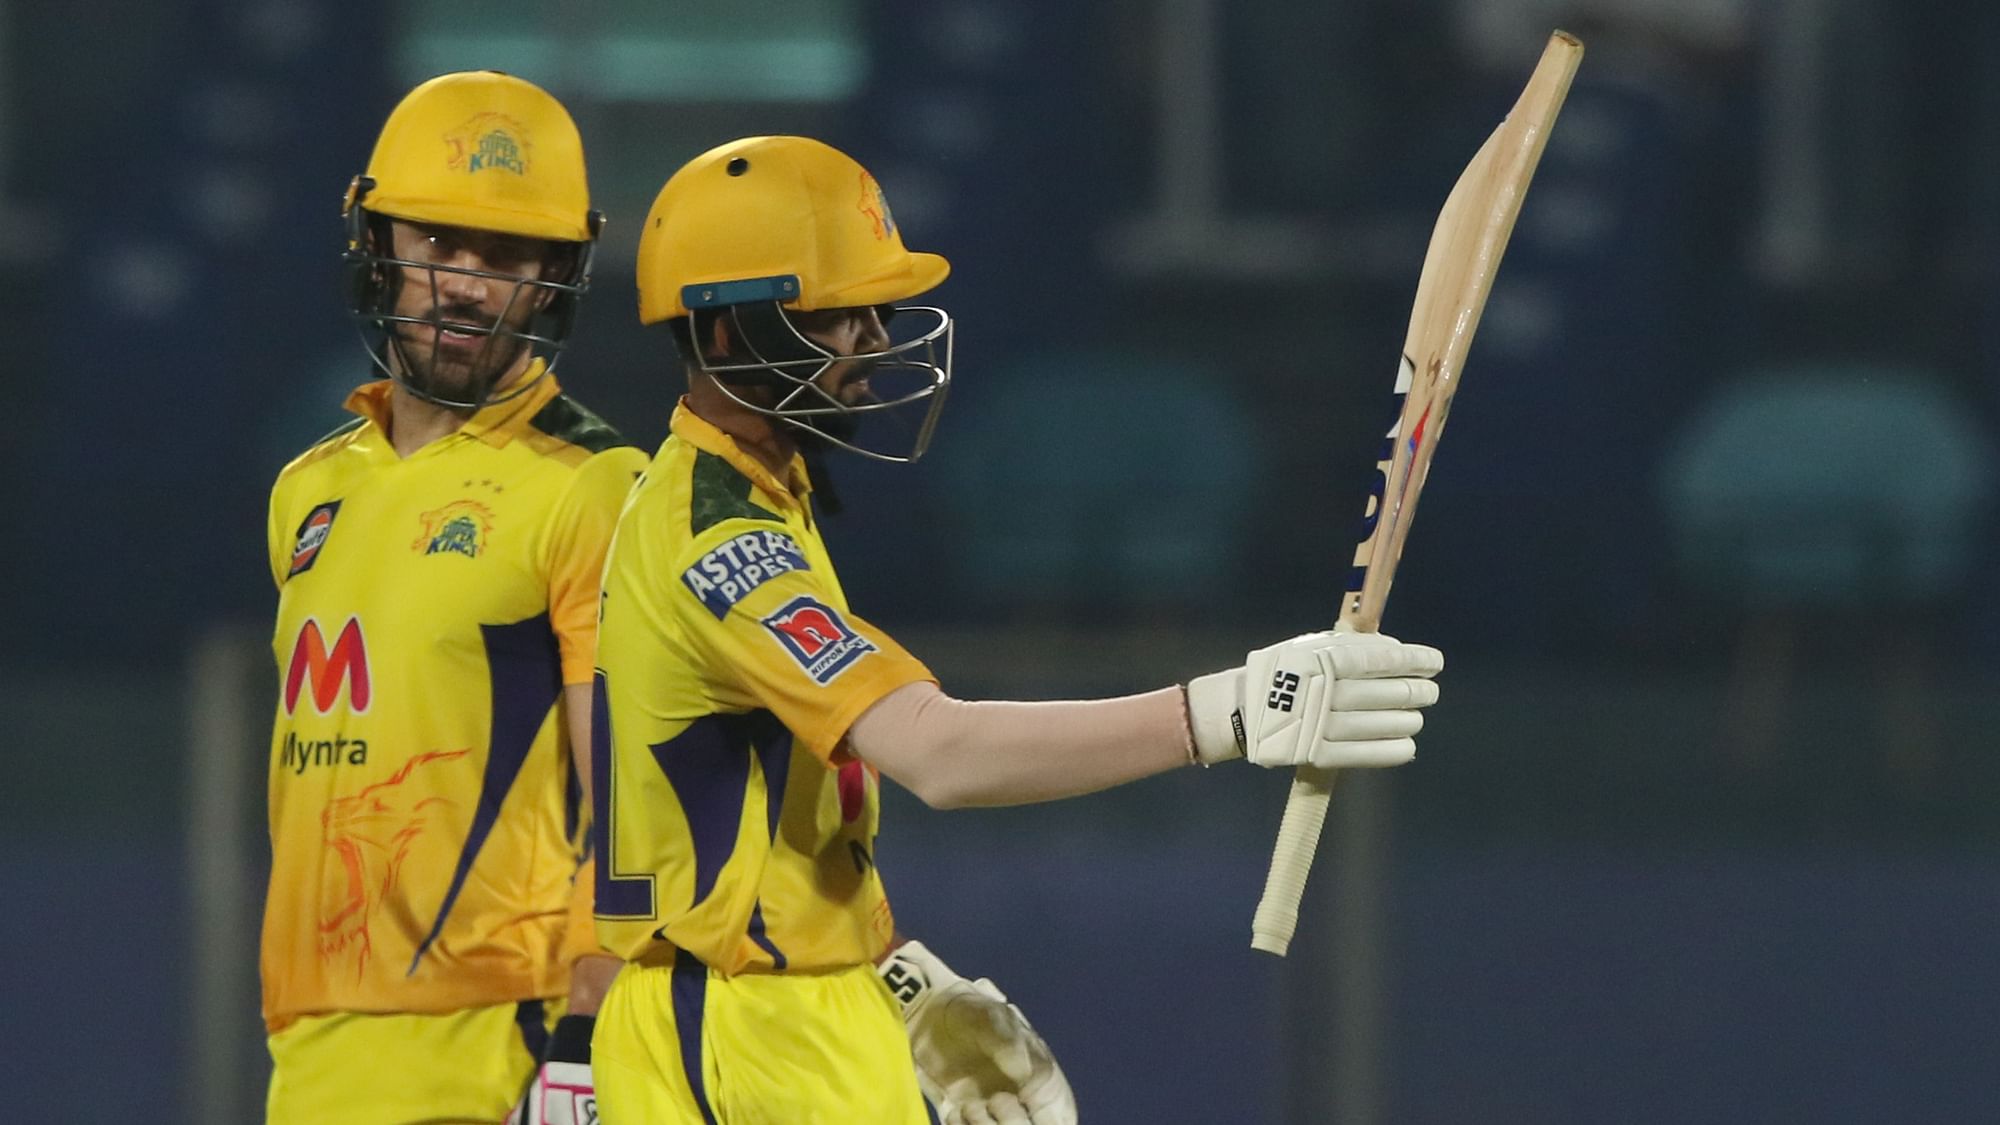 Faf du Plessis and Ruturaj Gaikwad scored fifties against SRH on Wednesday.